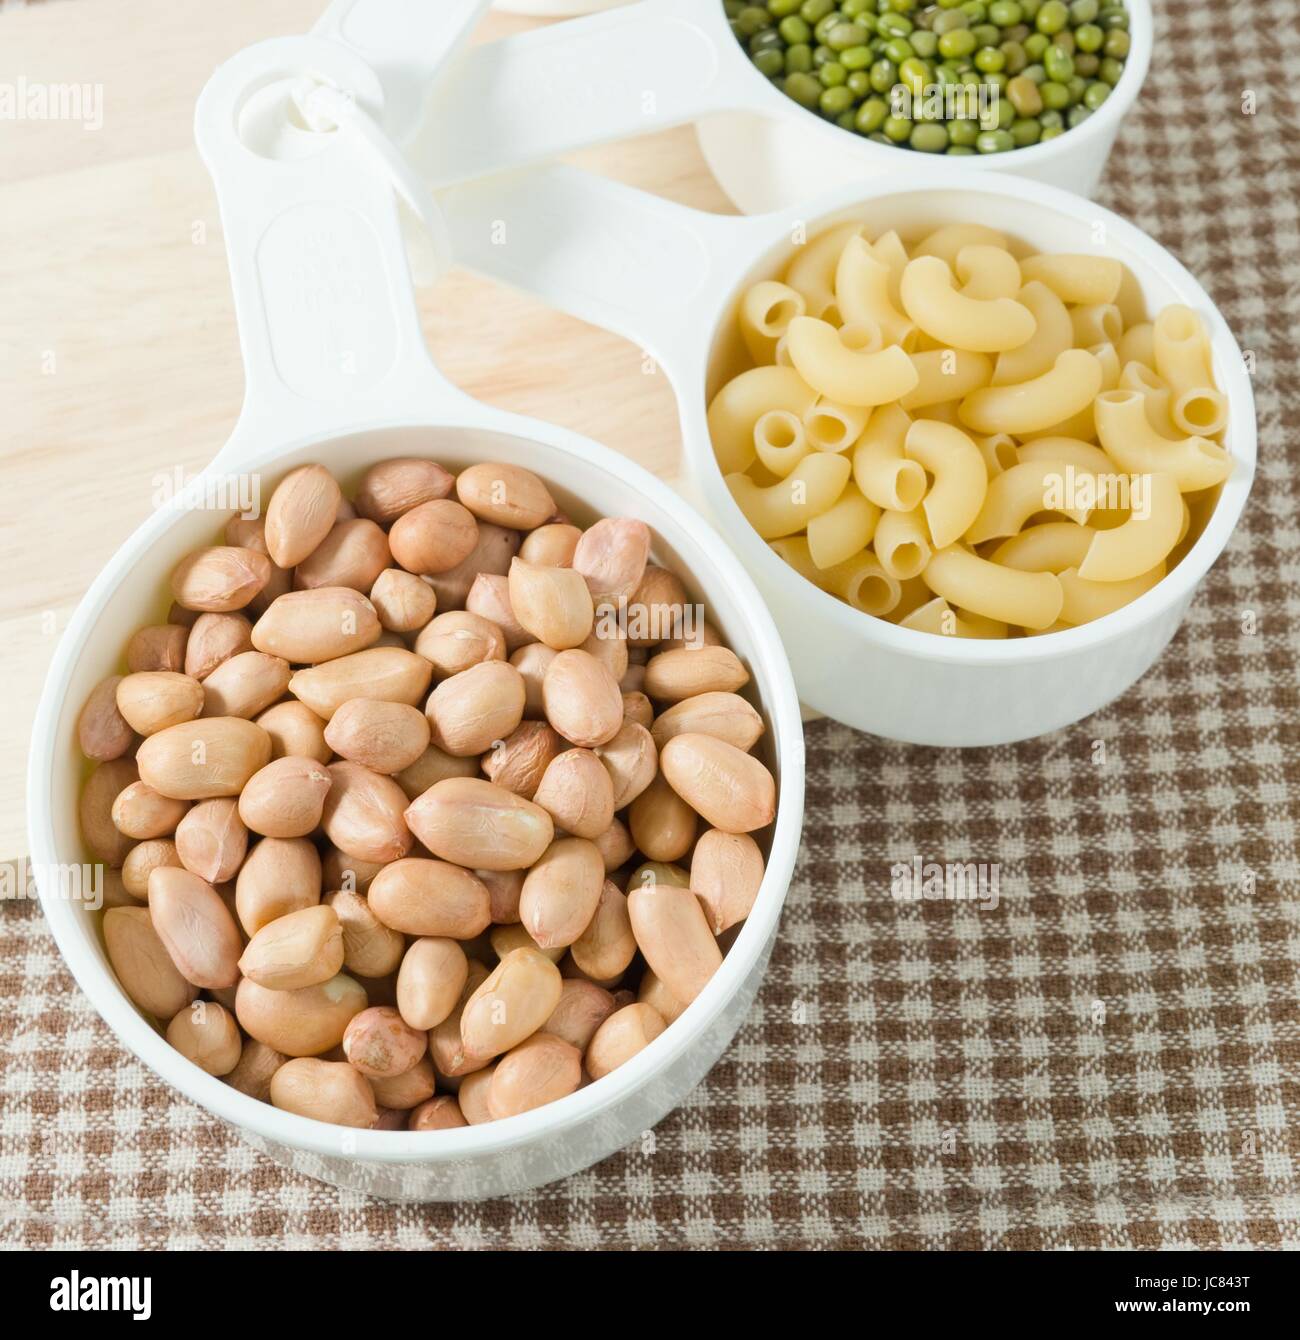 Carbohydrate Foods, Raw Pasta, Rice, Peanuts and Mung Beans in Plastic Measuring Cups. Stock Photo